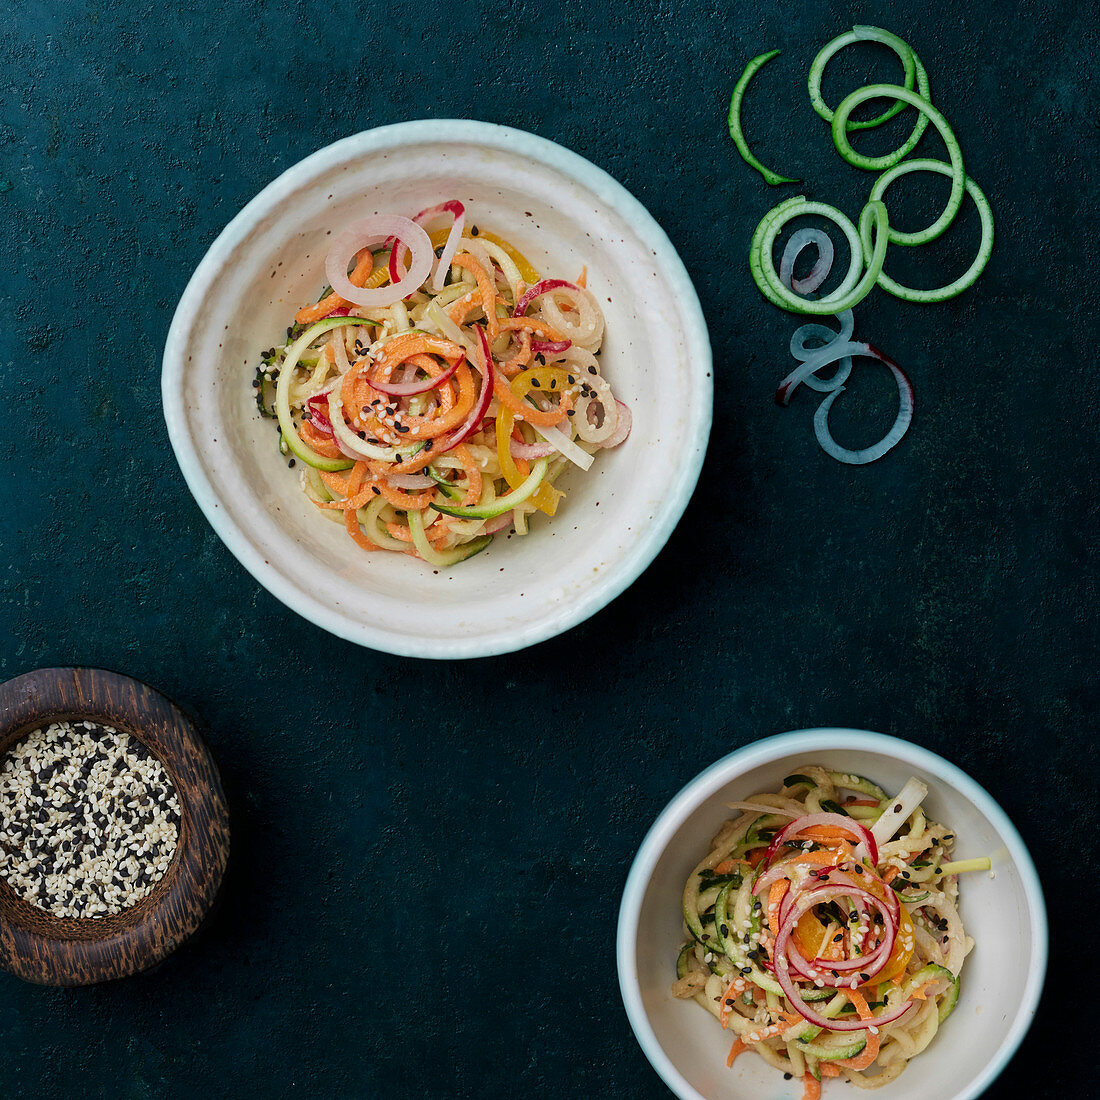 Vegetable spaghetti salad made with courgette and carrots, with sesame seeds